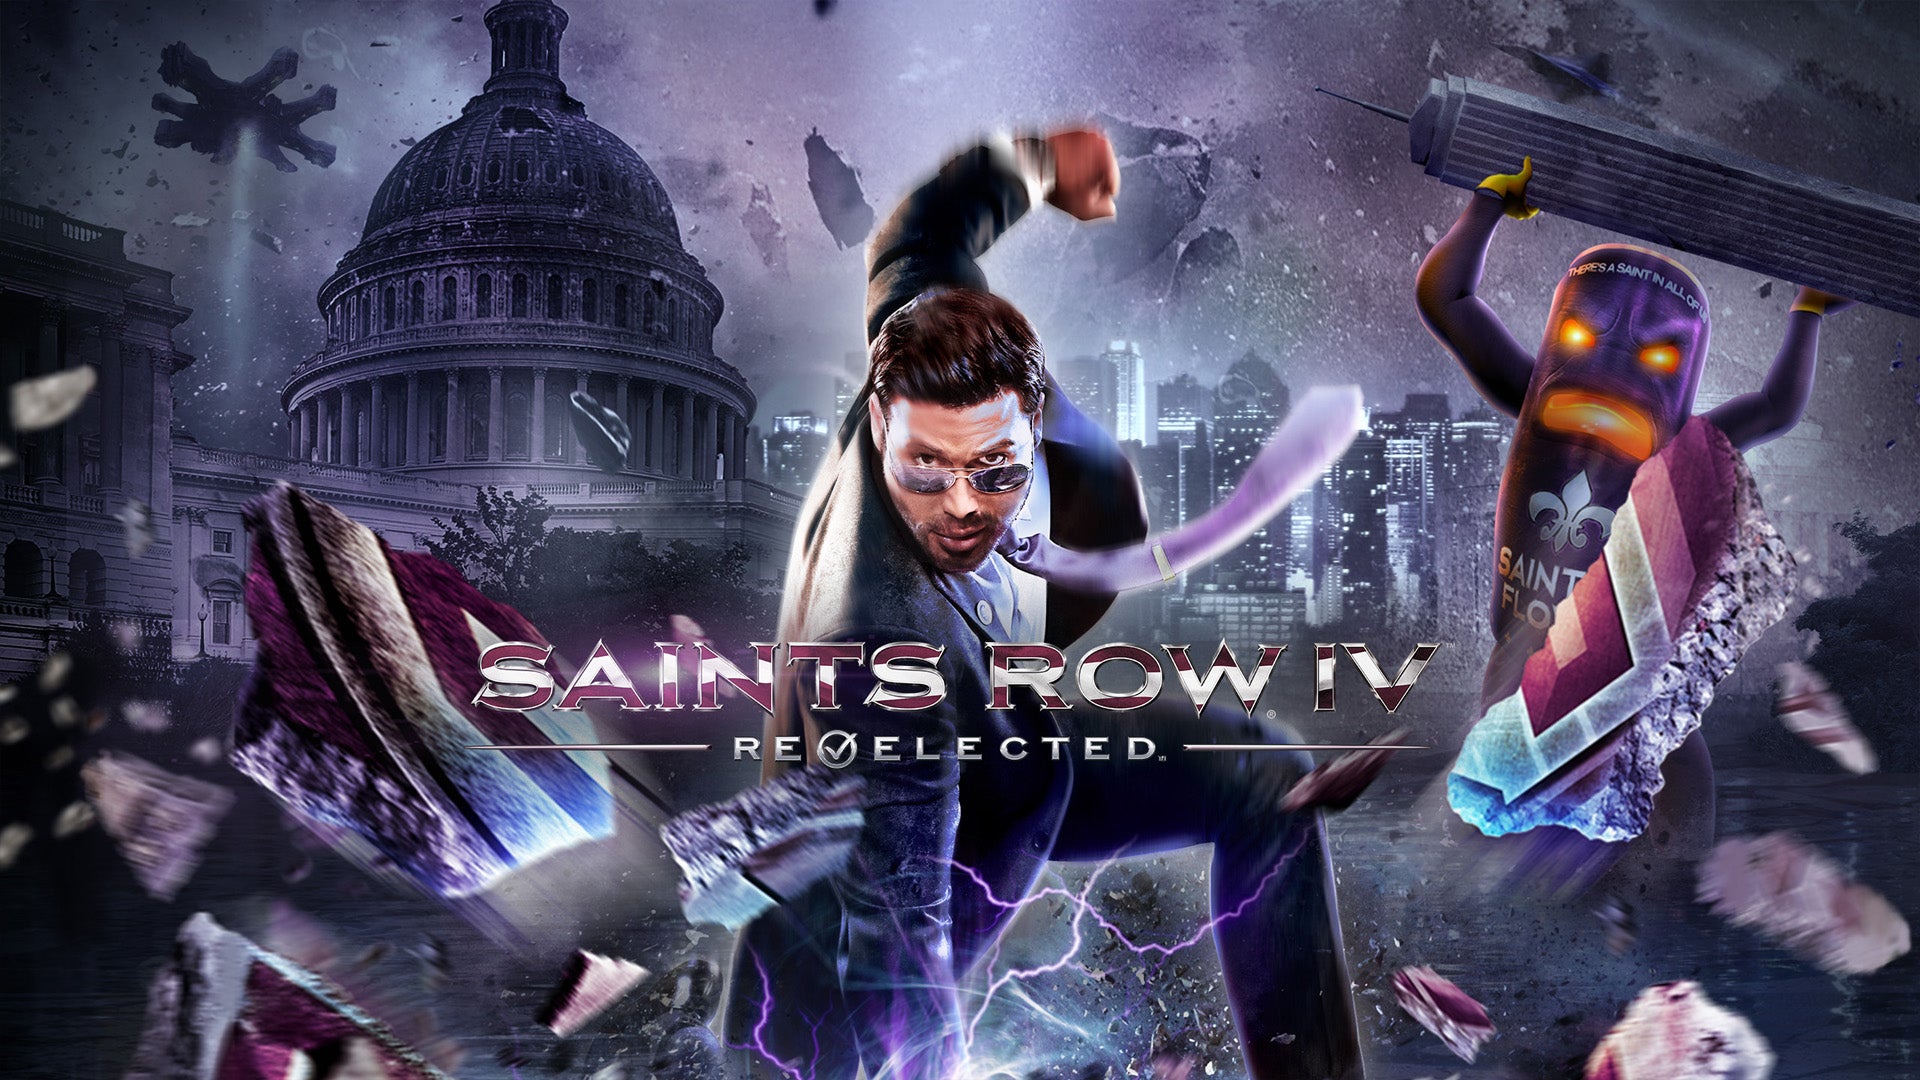 Image for Saints Row 4 is free on the Epic Games Store next week, just in time for its crossplay update